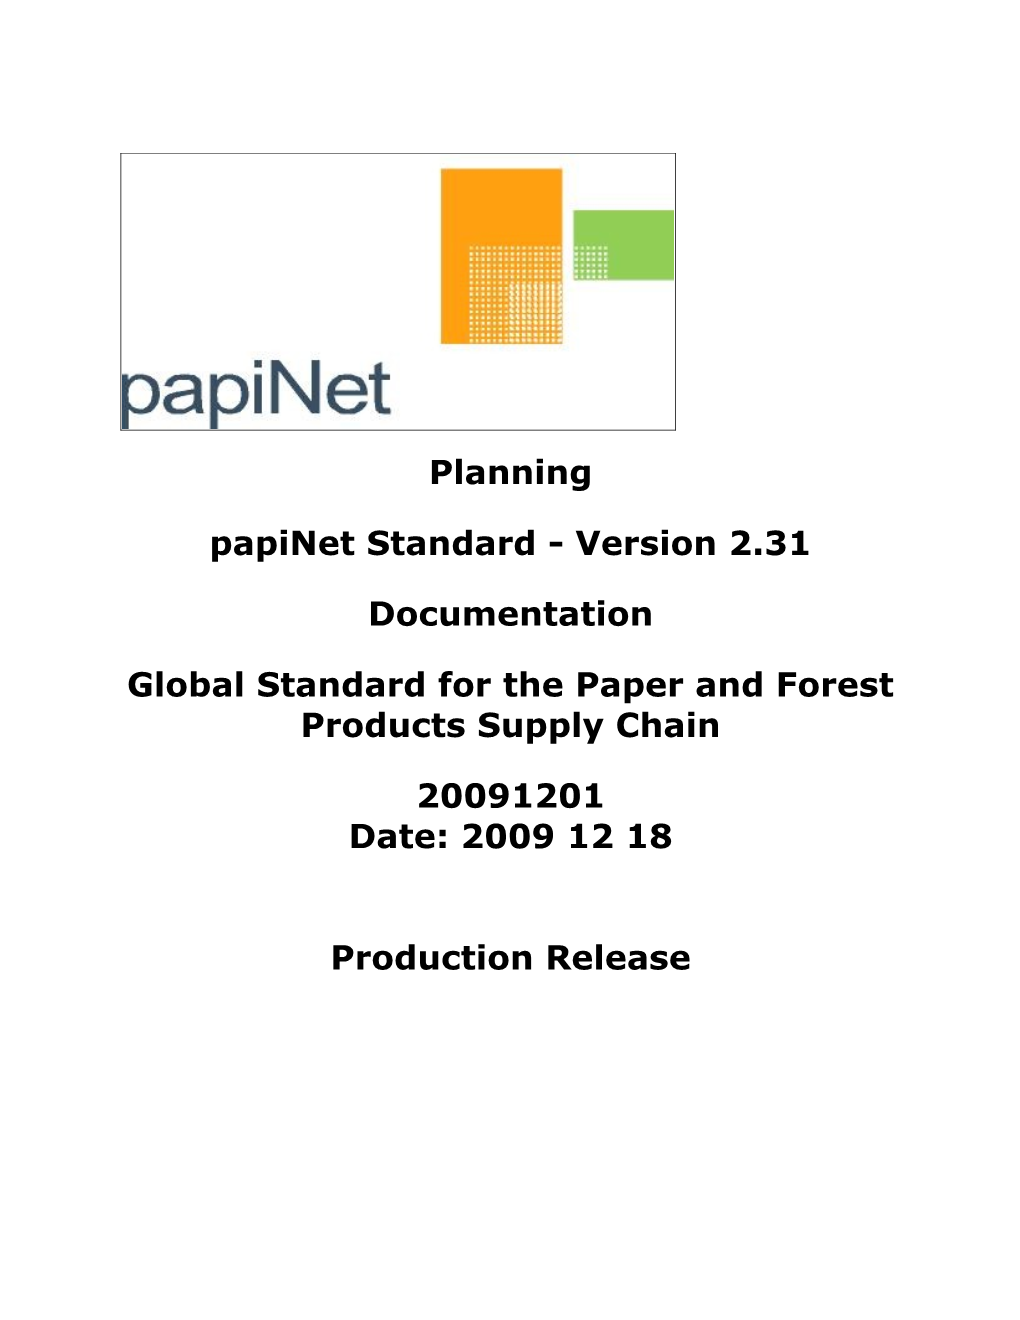 Global Standard for the Paper and Forest Products Supply Chain s1